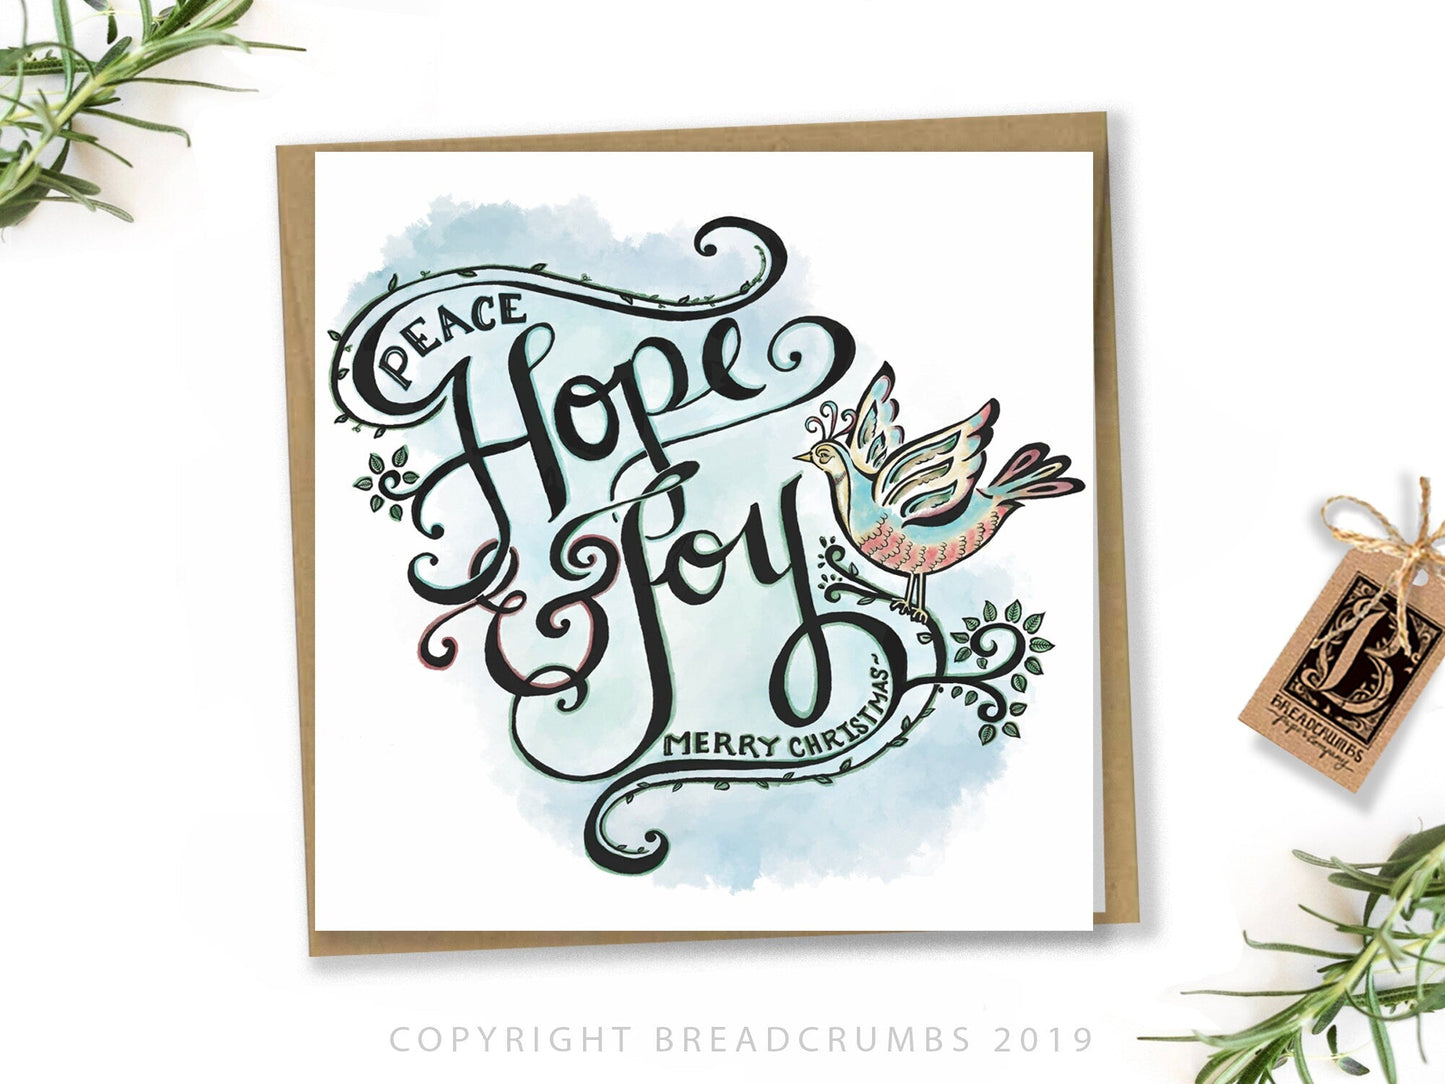 Peace, Hope, and Joy Christmas Card-Greeting & Note Cards-Breadcrumbs Paper Co